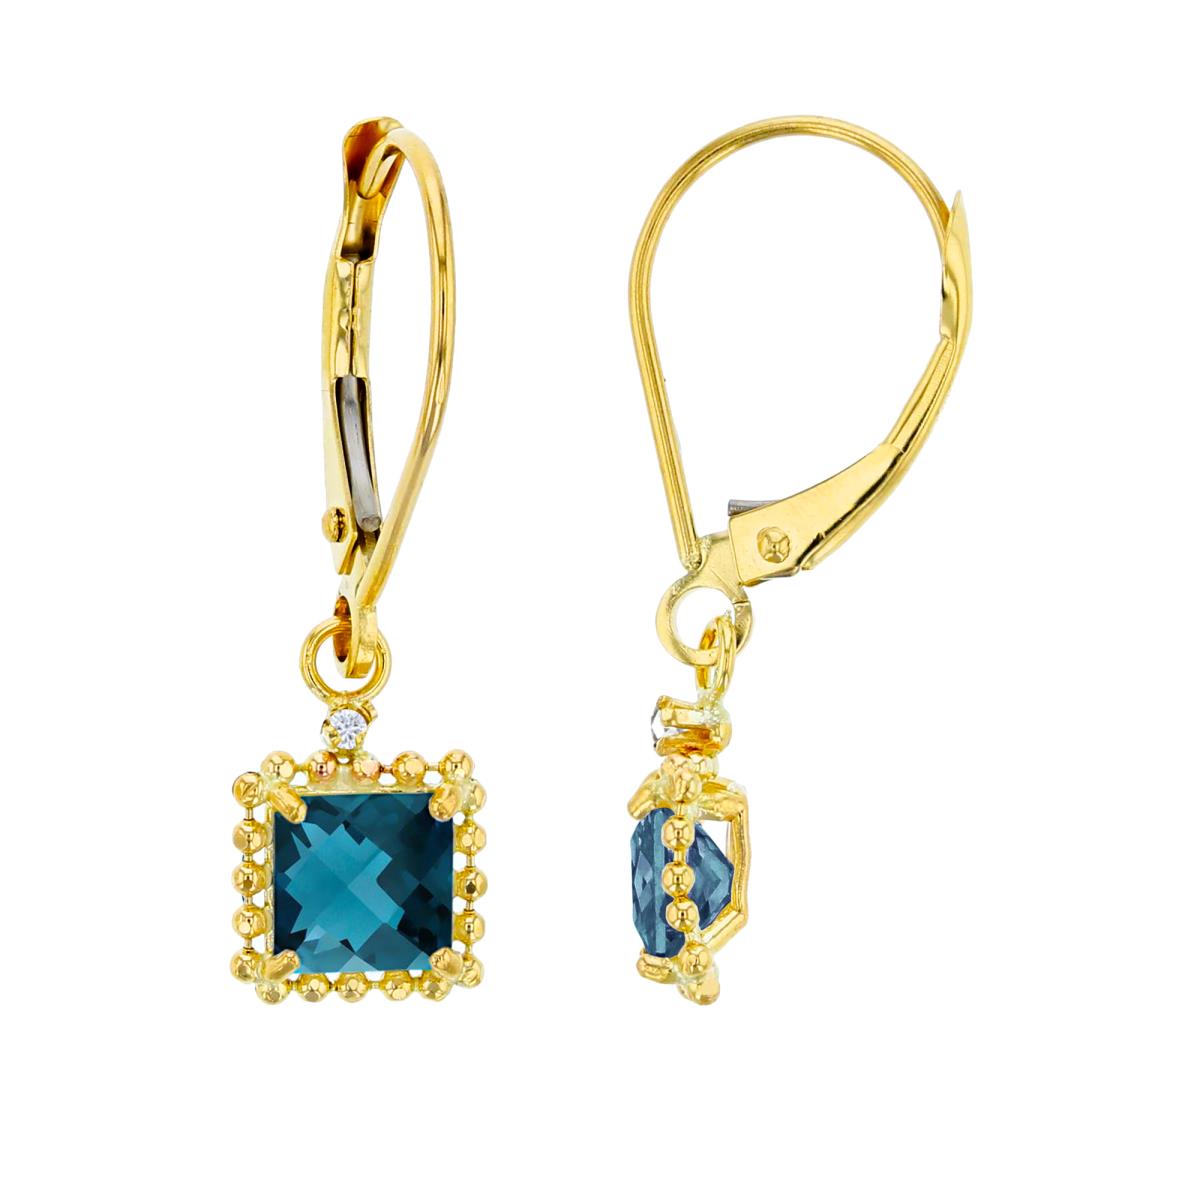 14K Yellow Gold 1.25mm Rd Created White Sapphire & 5mm Sq London Blue Topaz Bead Frame Drop Lever-Back Earring